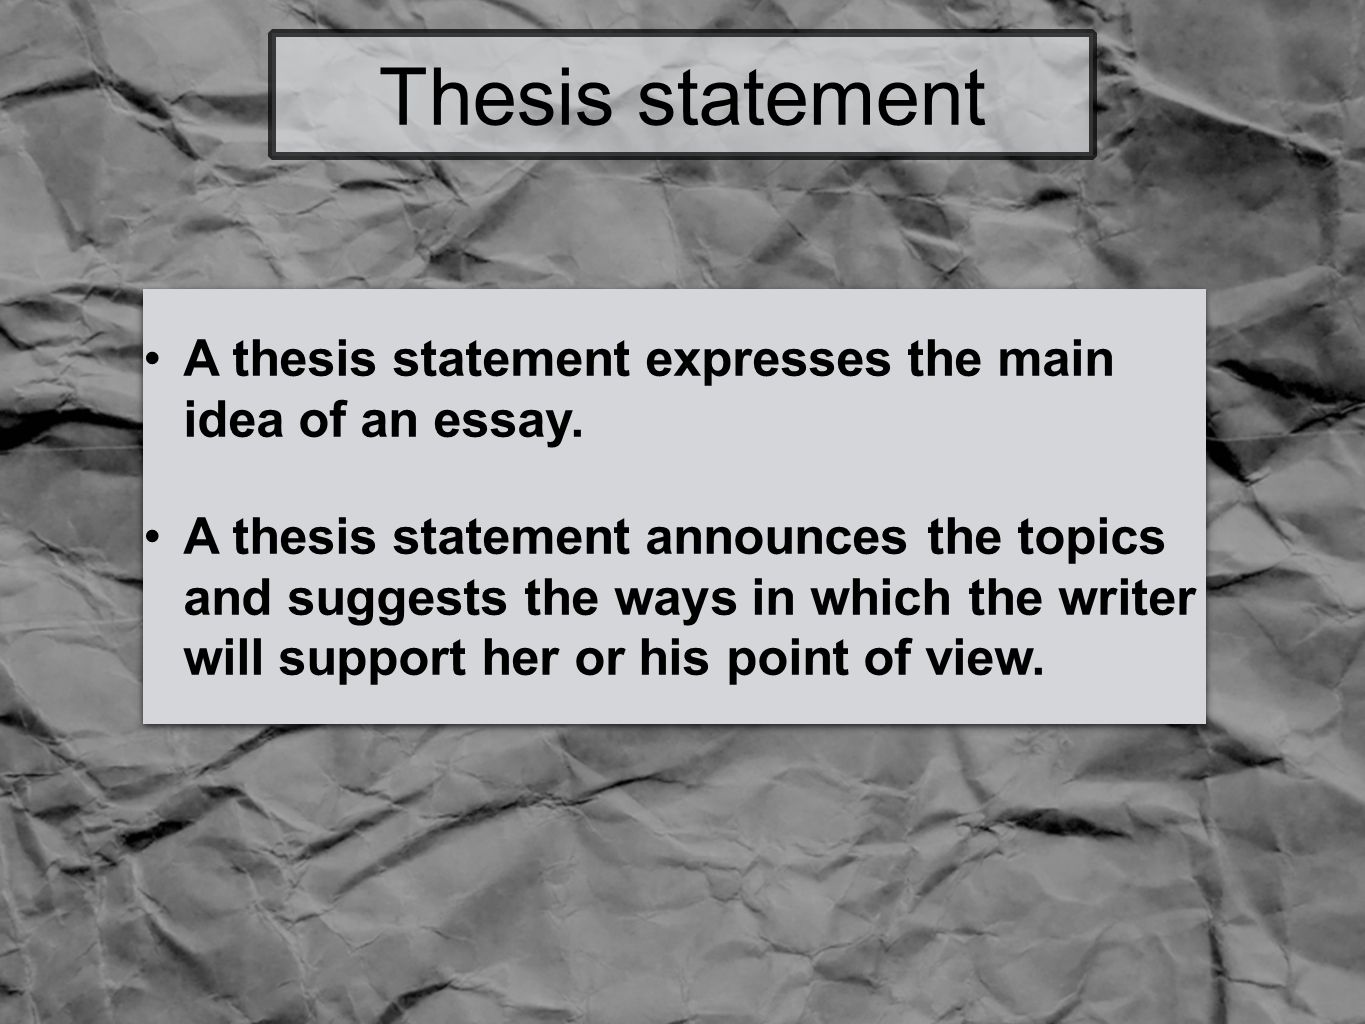 Thesis statement A thesis statement expresses the main idea of an essay.